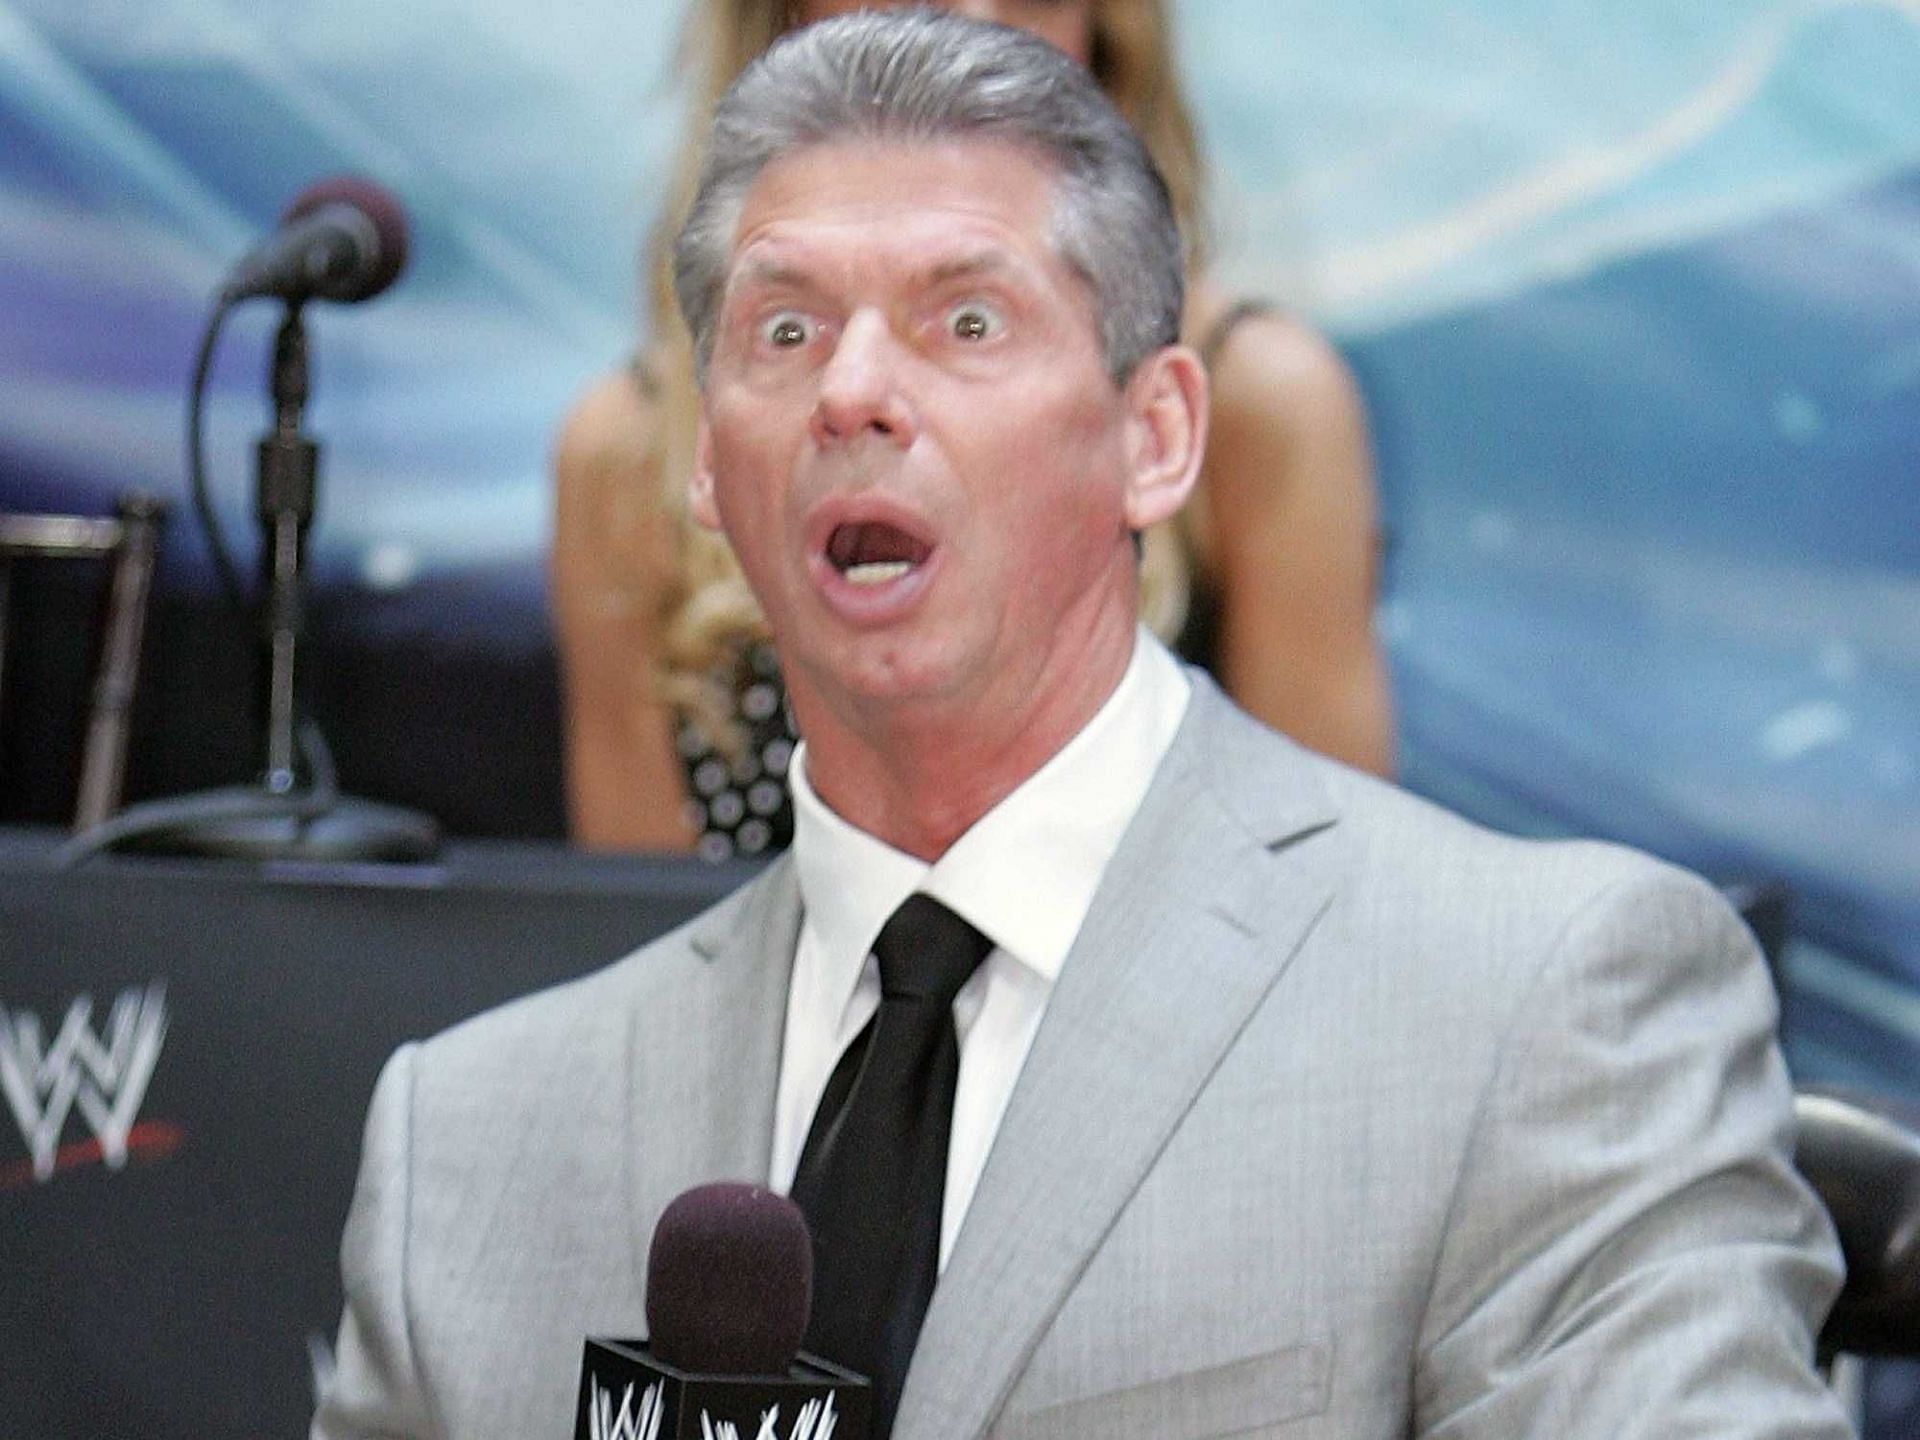 Vince McMahon retired from WWE on July 22